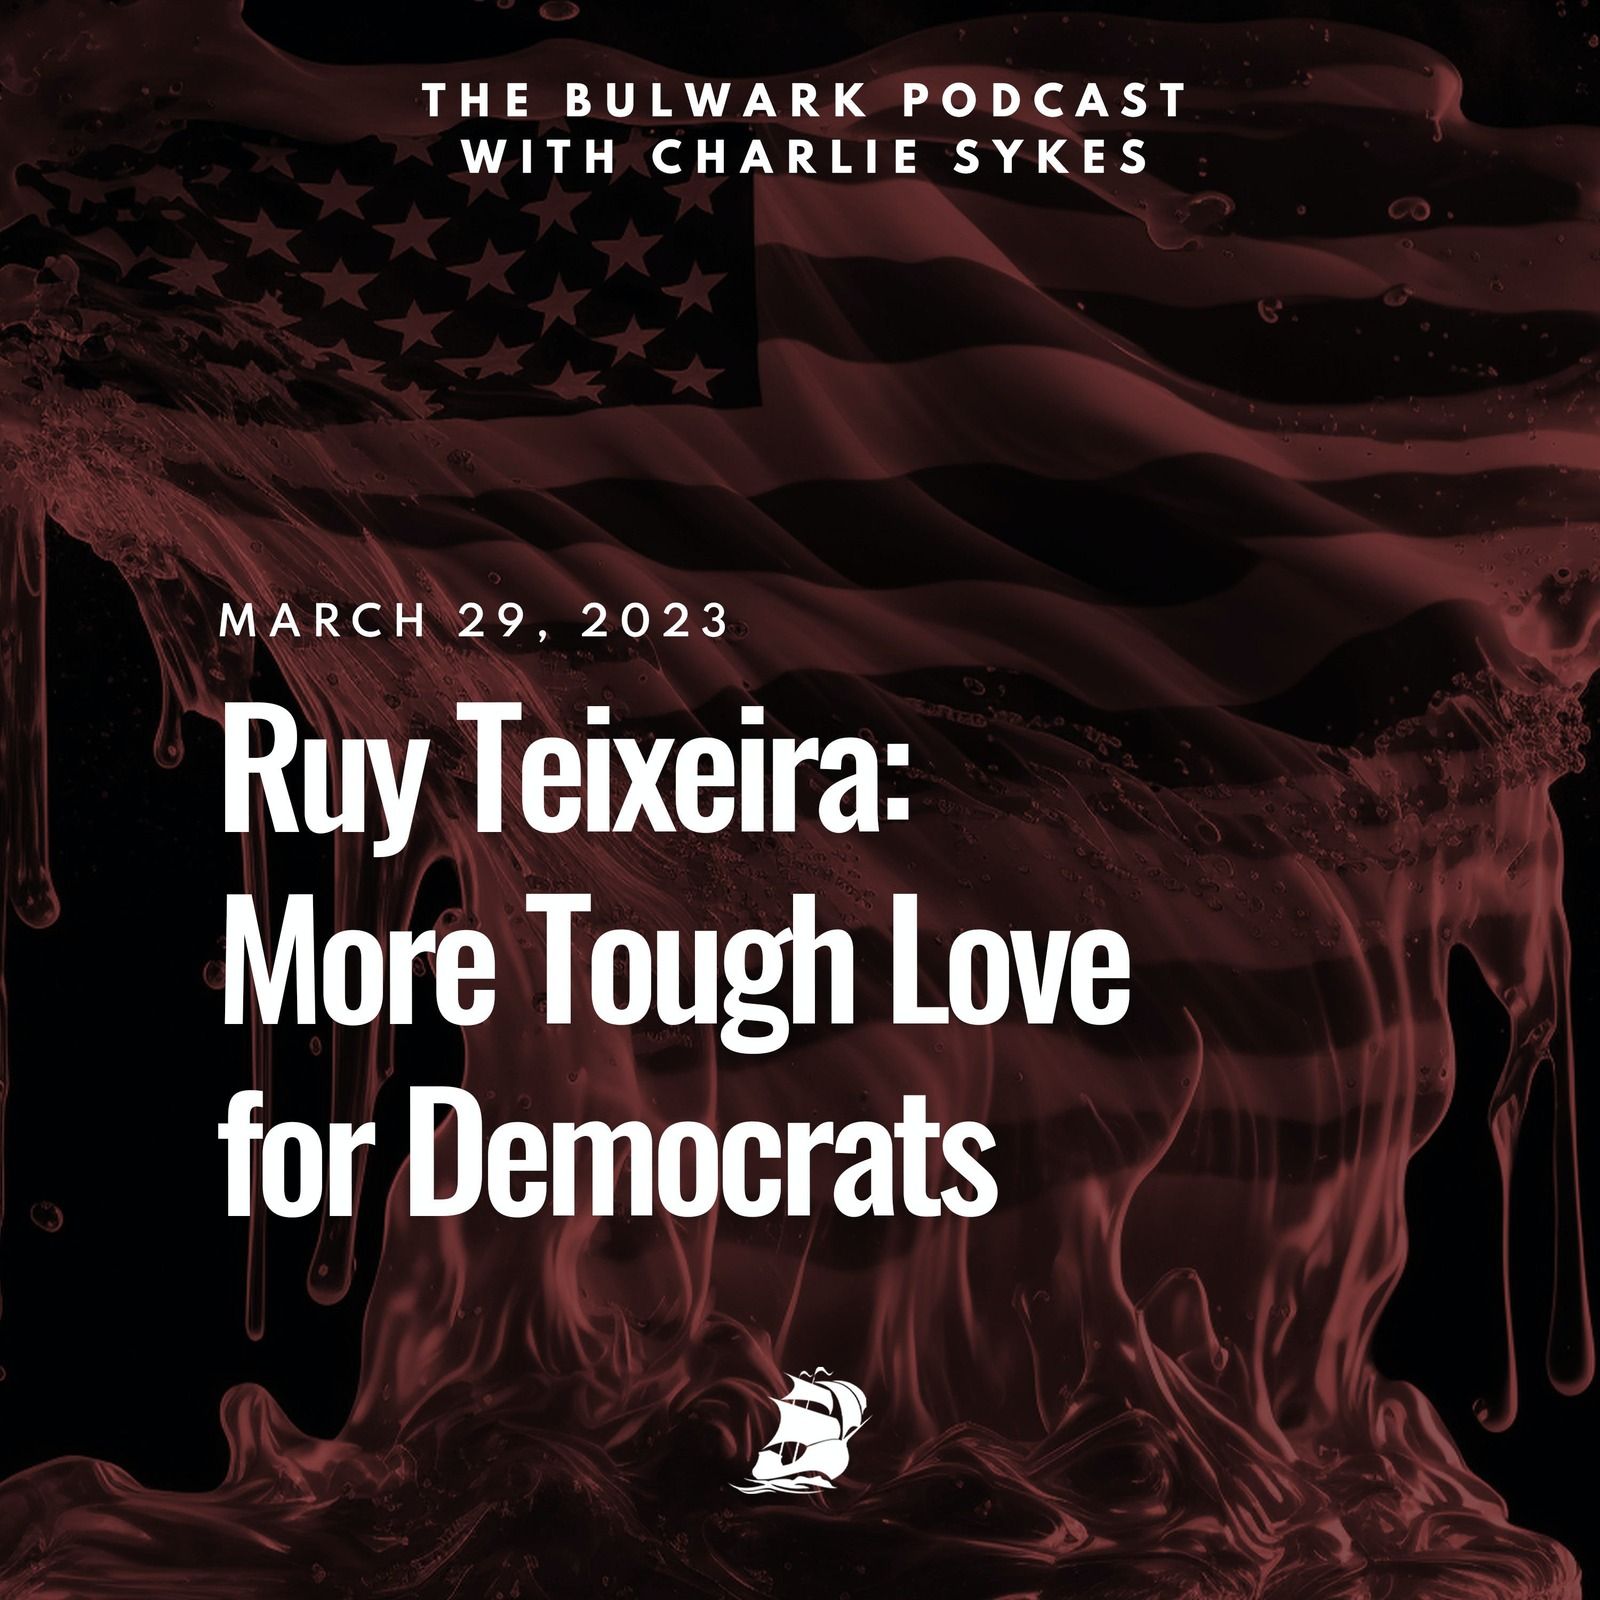 Ruy Teixeira: More Tough Love for Democrats by The Bulwark Podcast